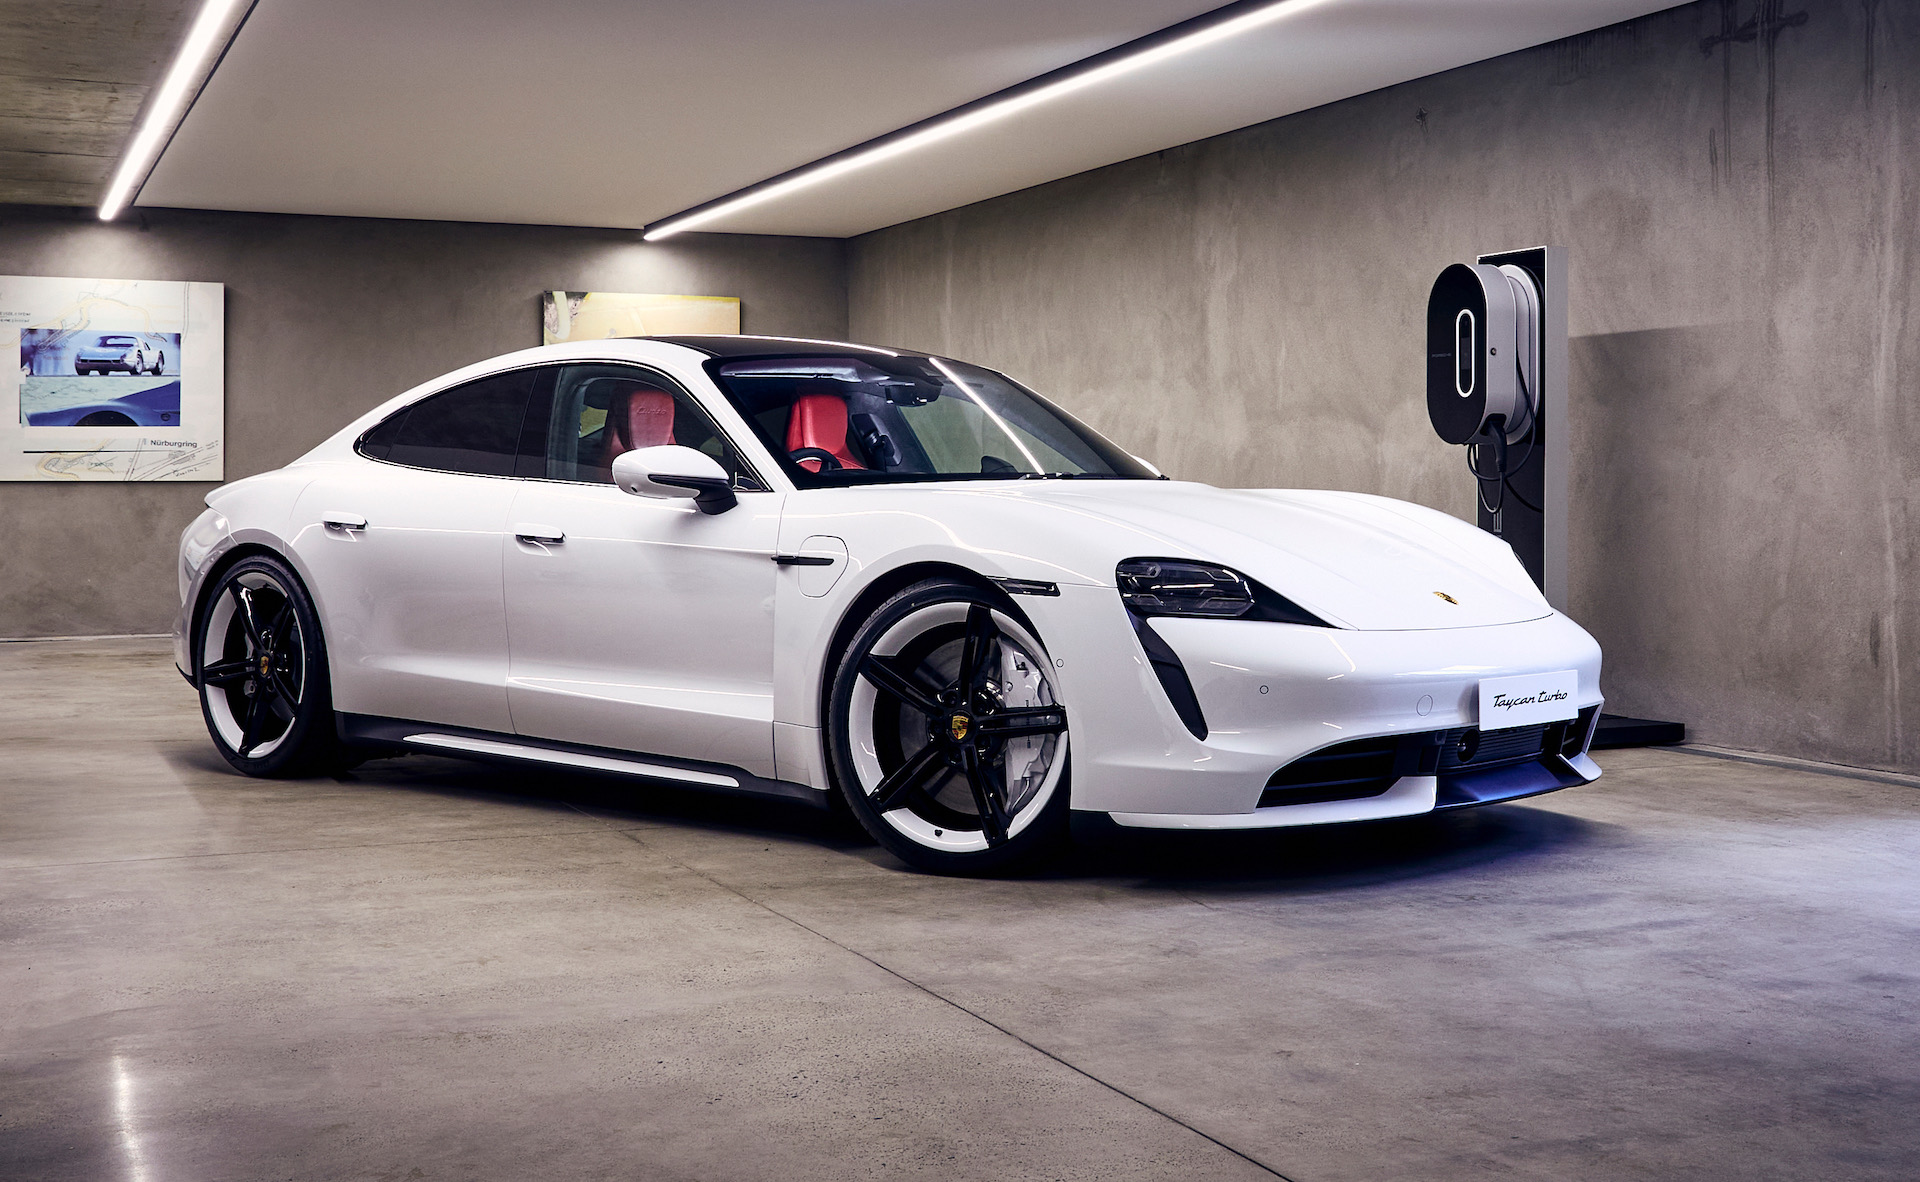 Porsche Taycan now on sale in Australia, priced from 191,000